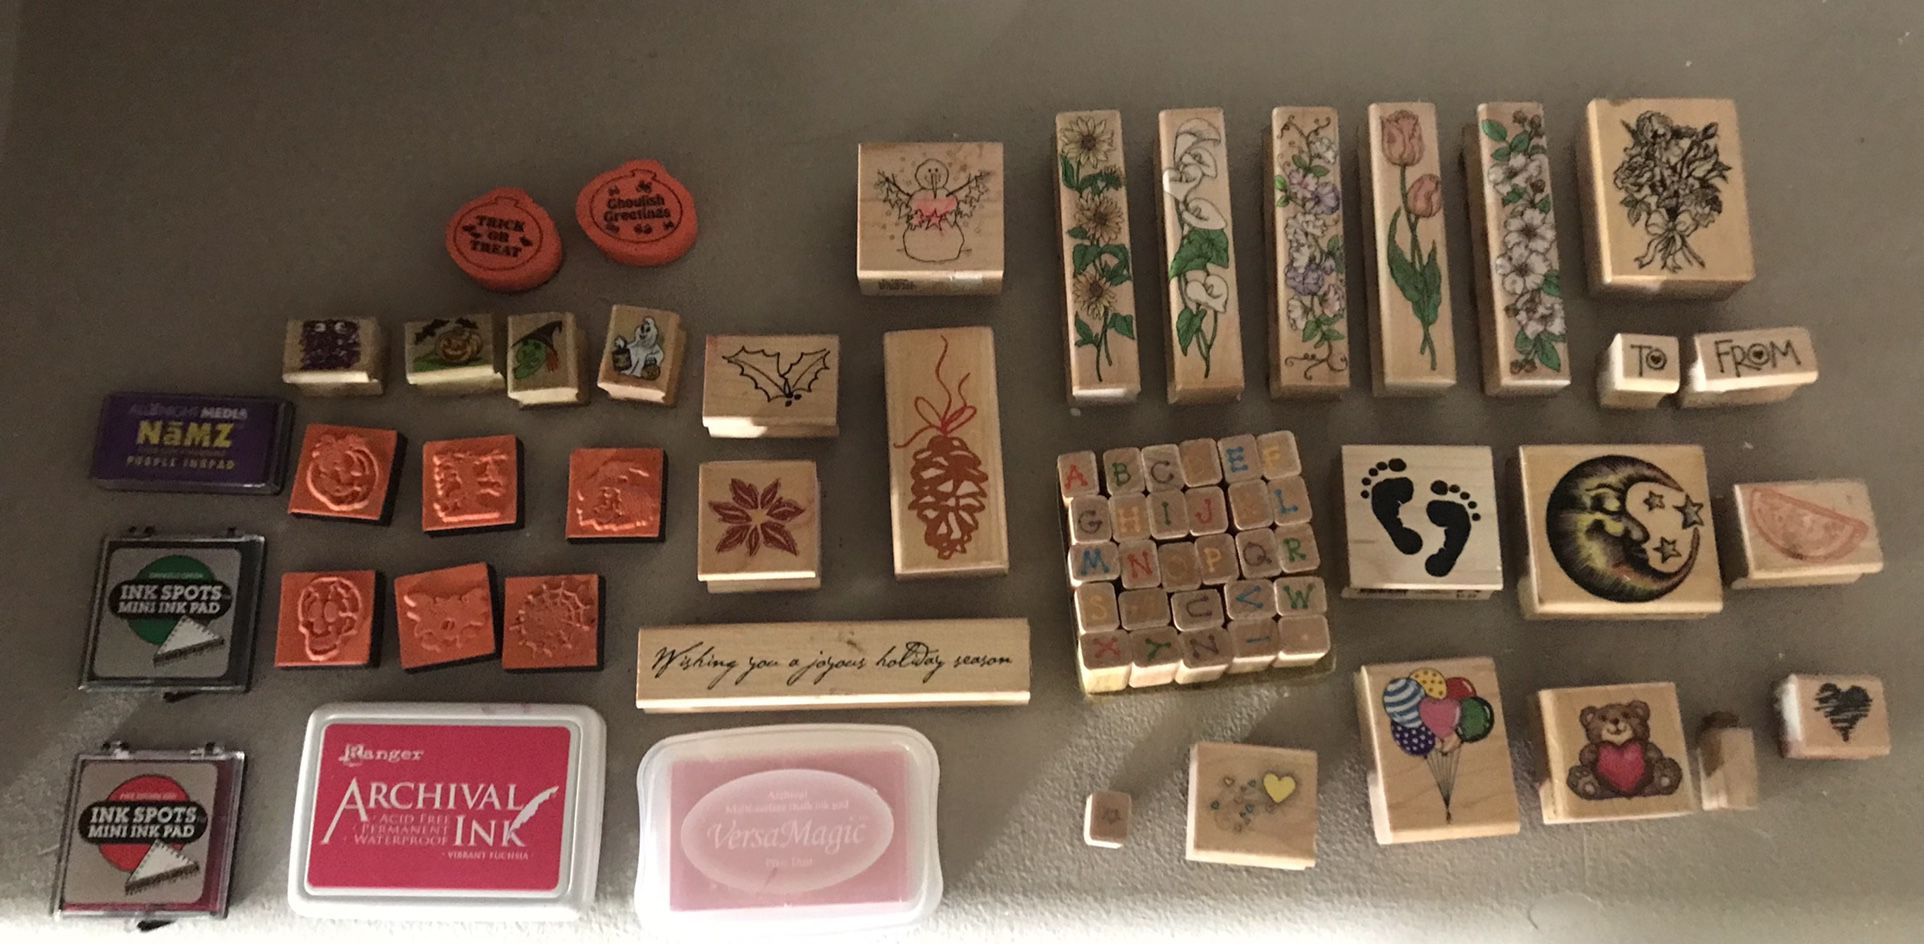 Crafting Stamps: Holidays, Alphabet, Floral, and More